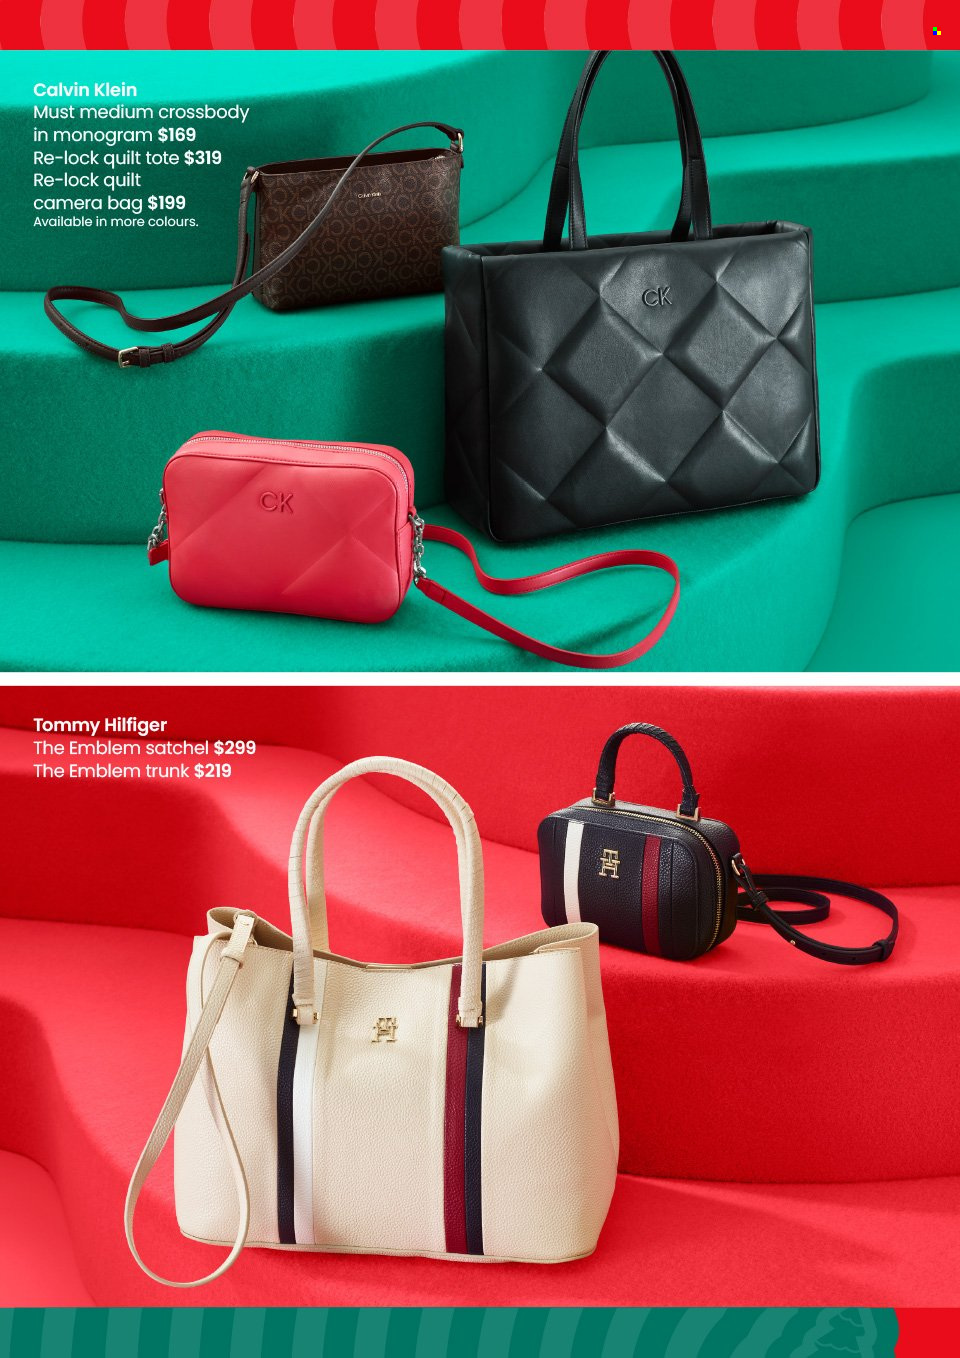 Myer Catalogue - 1 Nov 2023 - 24 Dec 2023 - Sales products - Calvin Klein, Tommy Hilfiger, bag, quilt, camera, tote. Page 37.